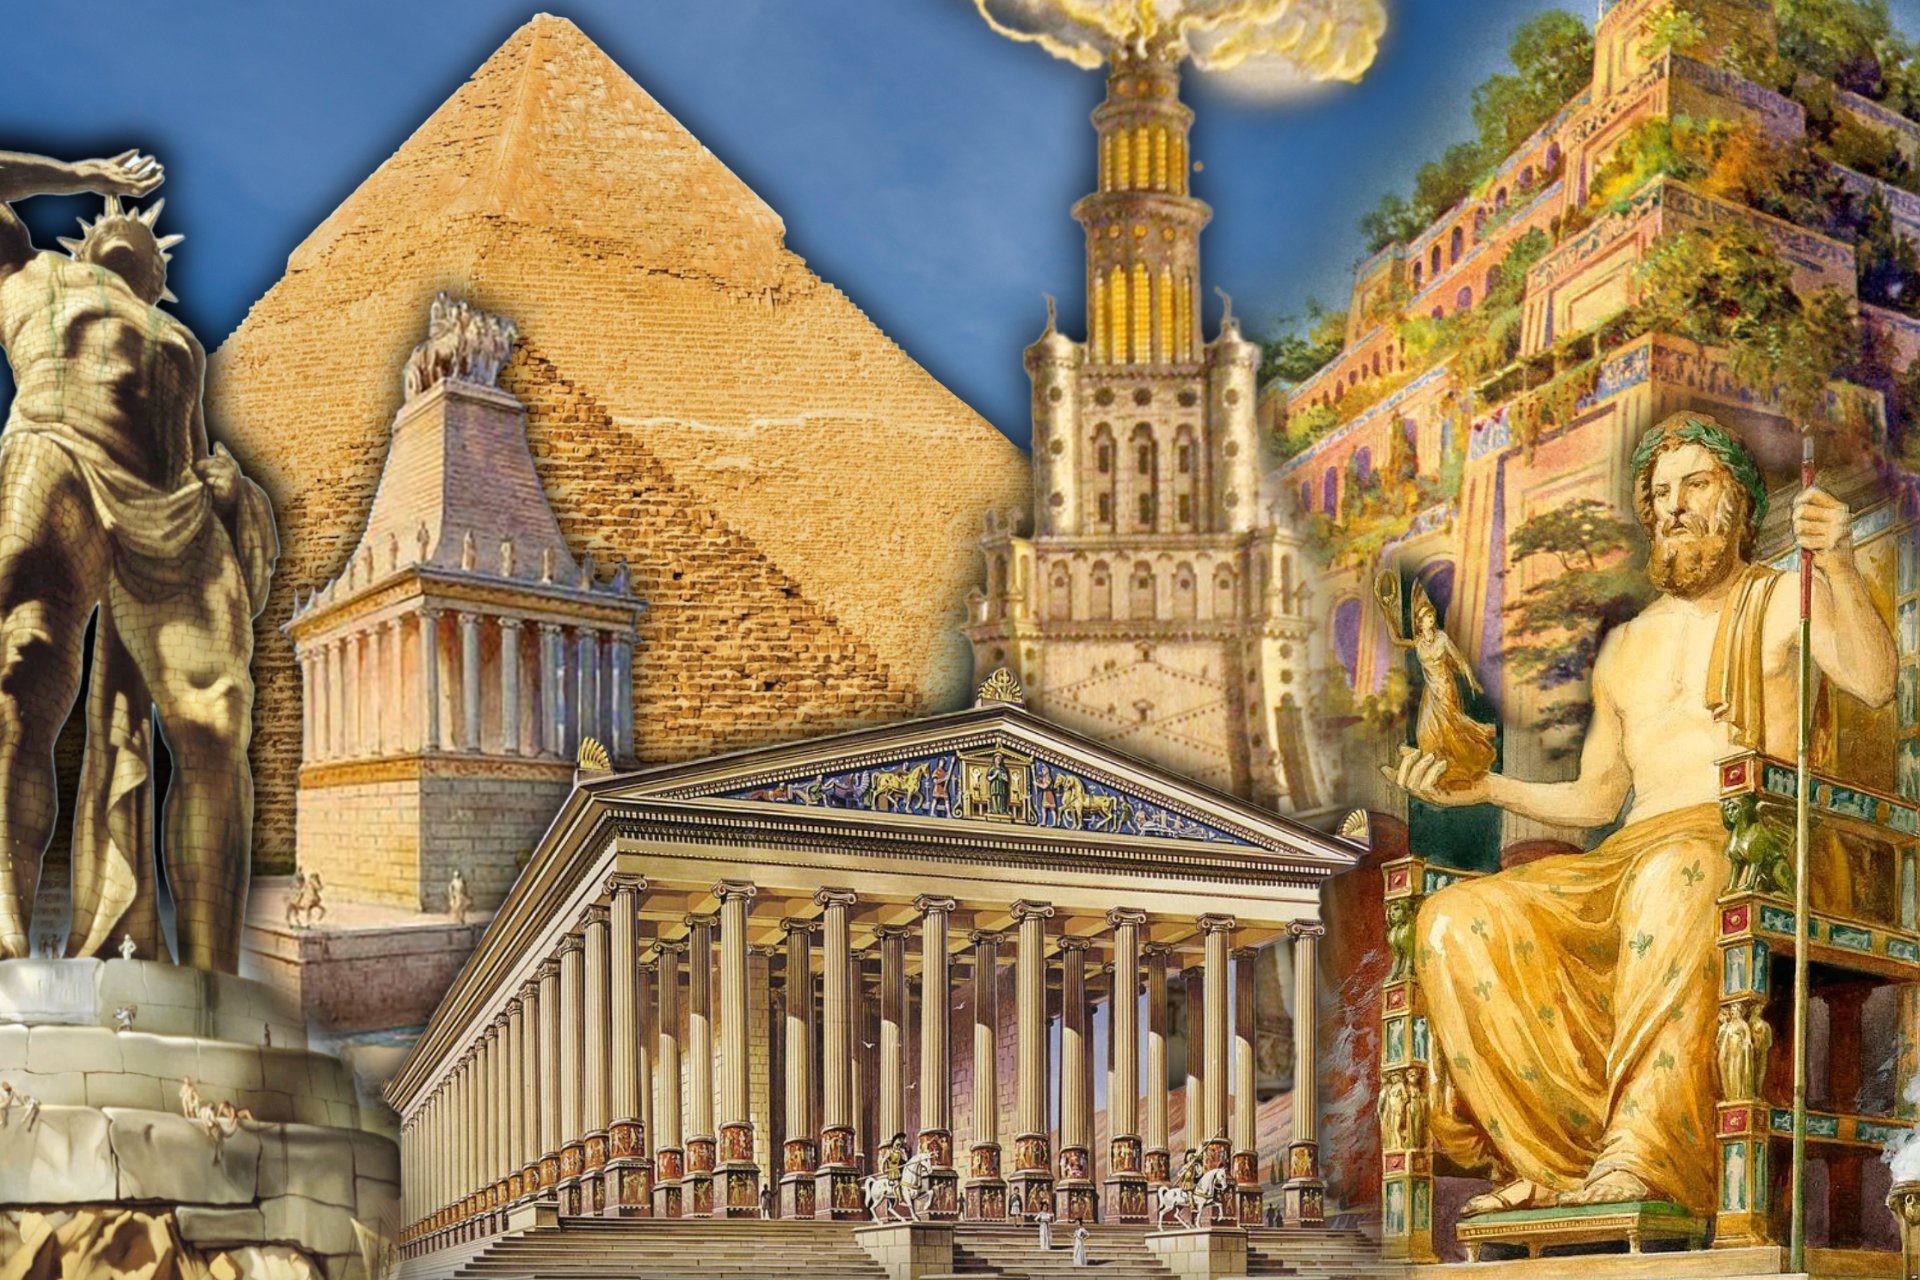 7 Wonders of the Ancient World — The Original Marvels